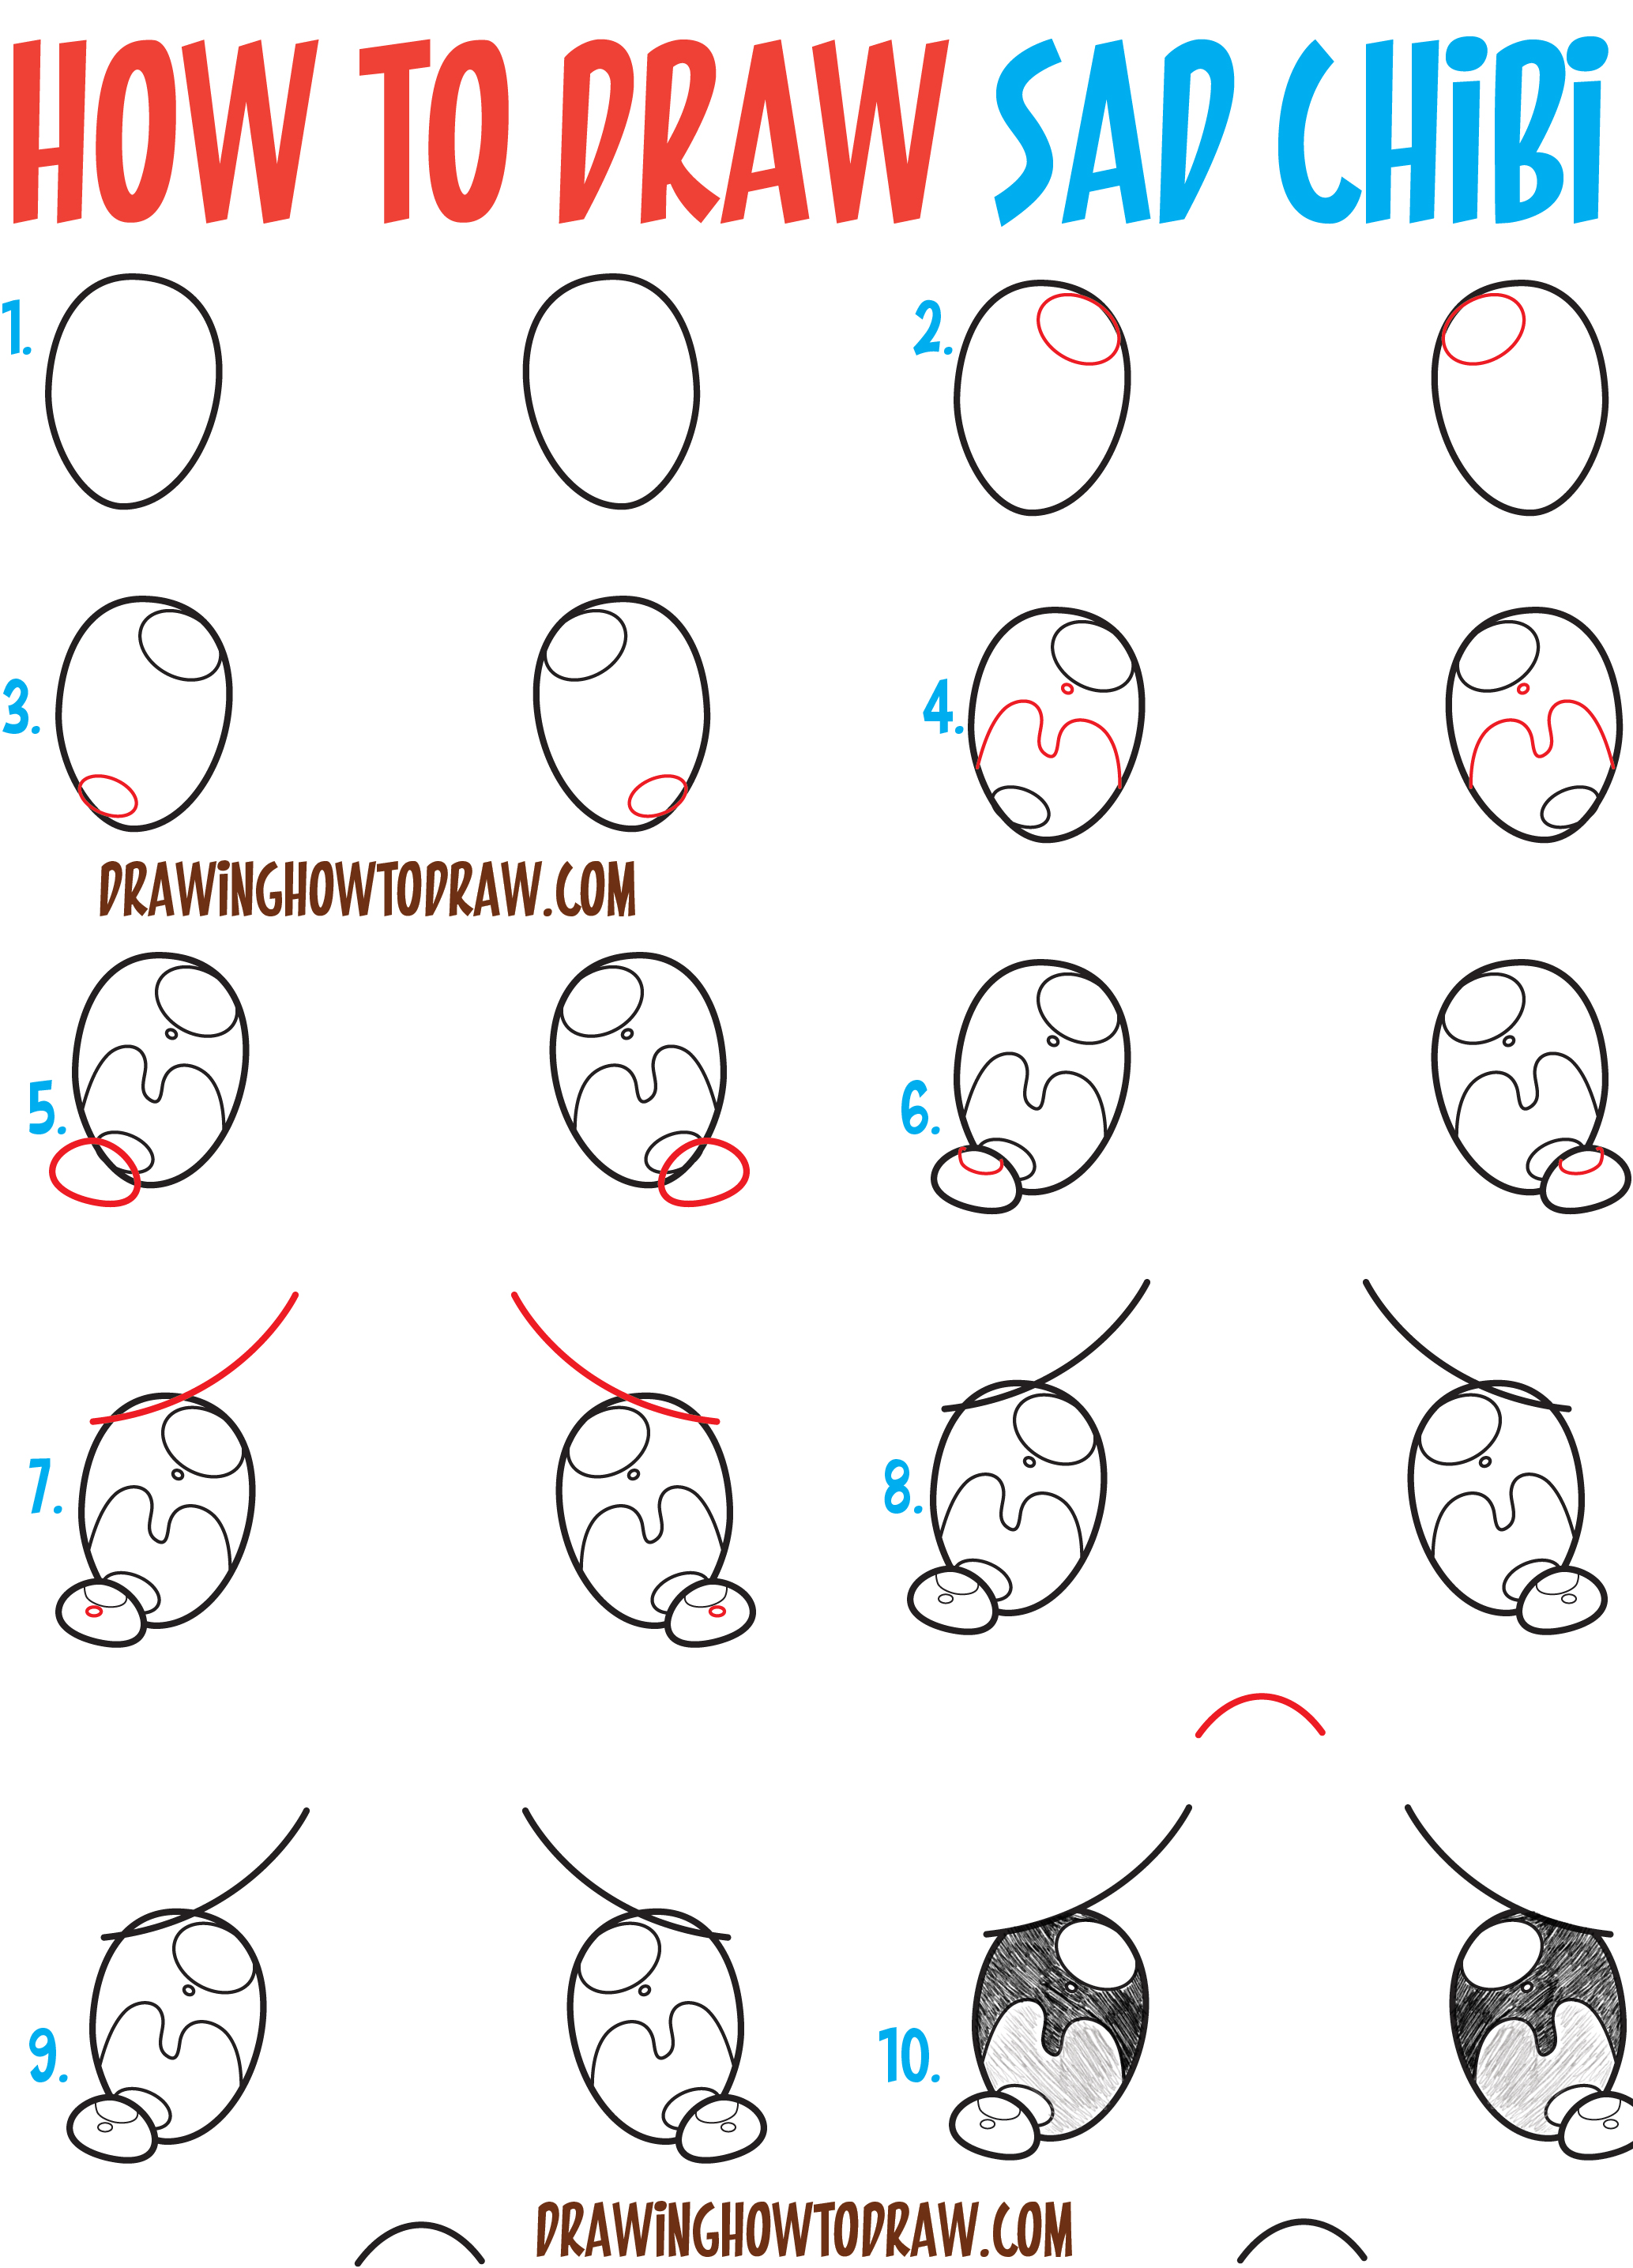 How to Draw Sad and Crying / Weeping Chibi Expressions - Easy Step by ...